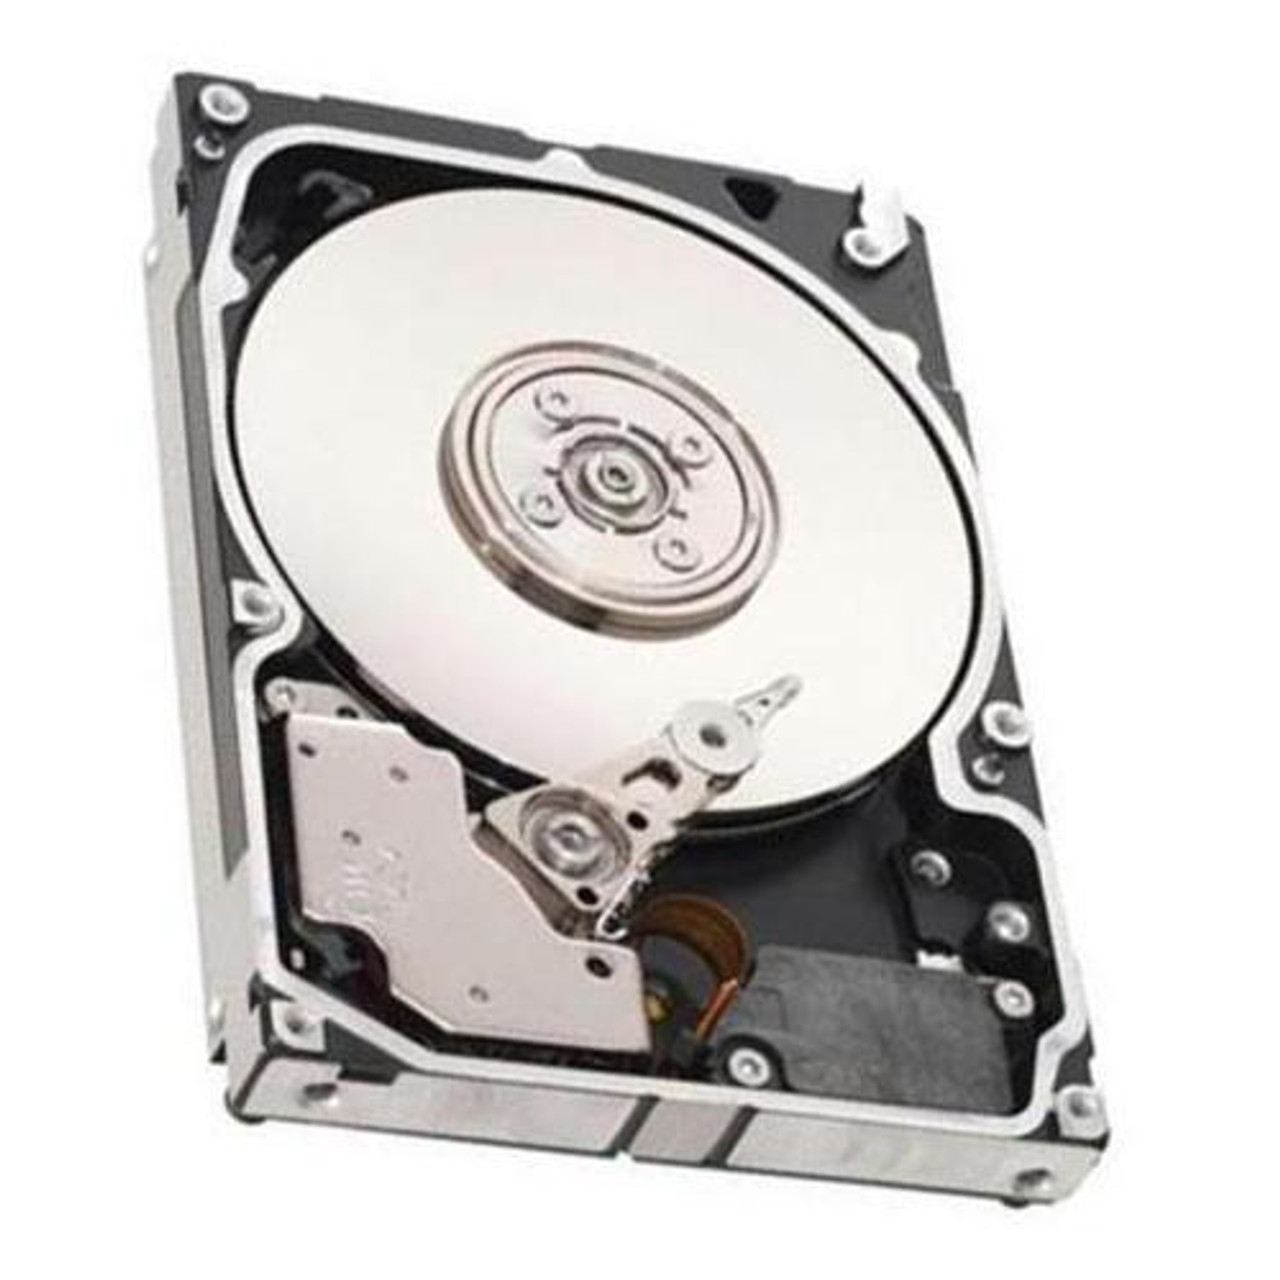 5048974 EMC 450GB 10000RPM Fibre Channel 4Gbps 16MB Cache 3.5-inch Internal Hard Drive for CLARiiON CX Series Storage Systems